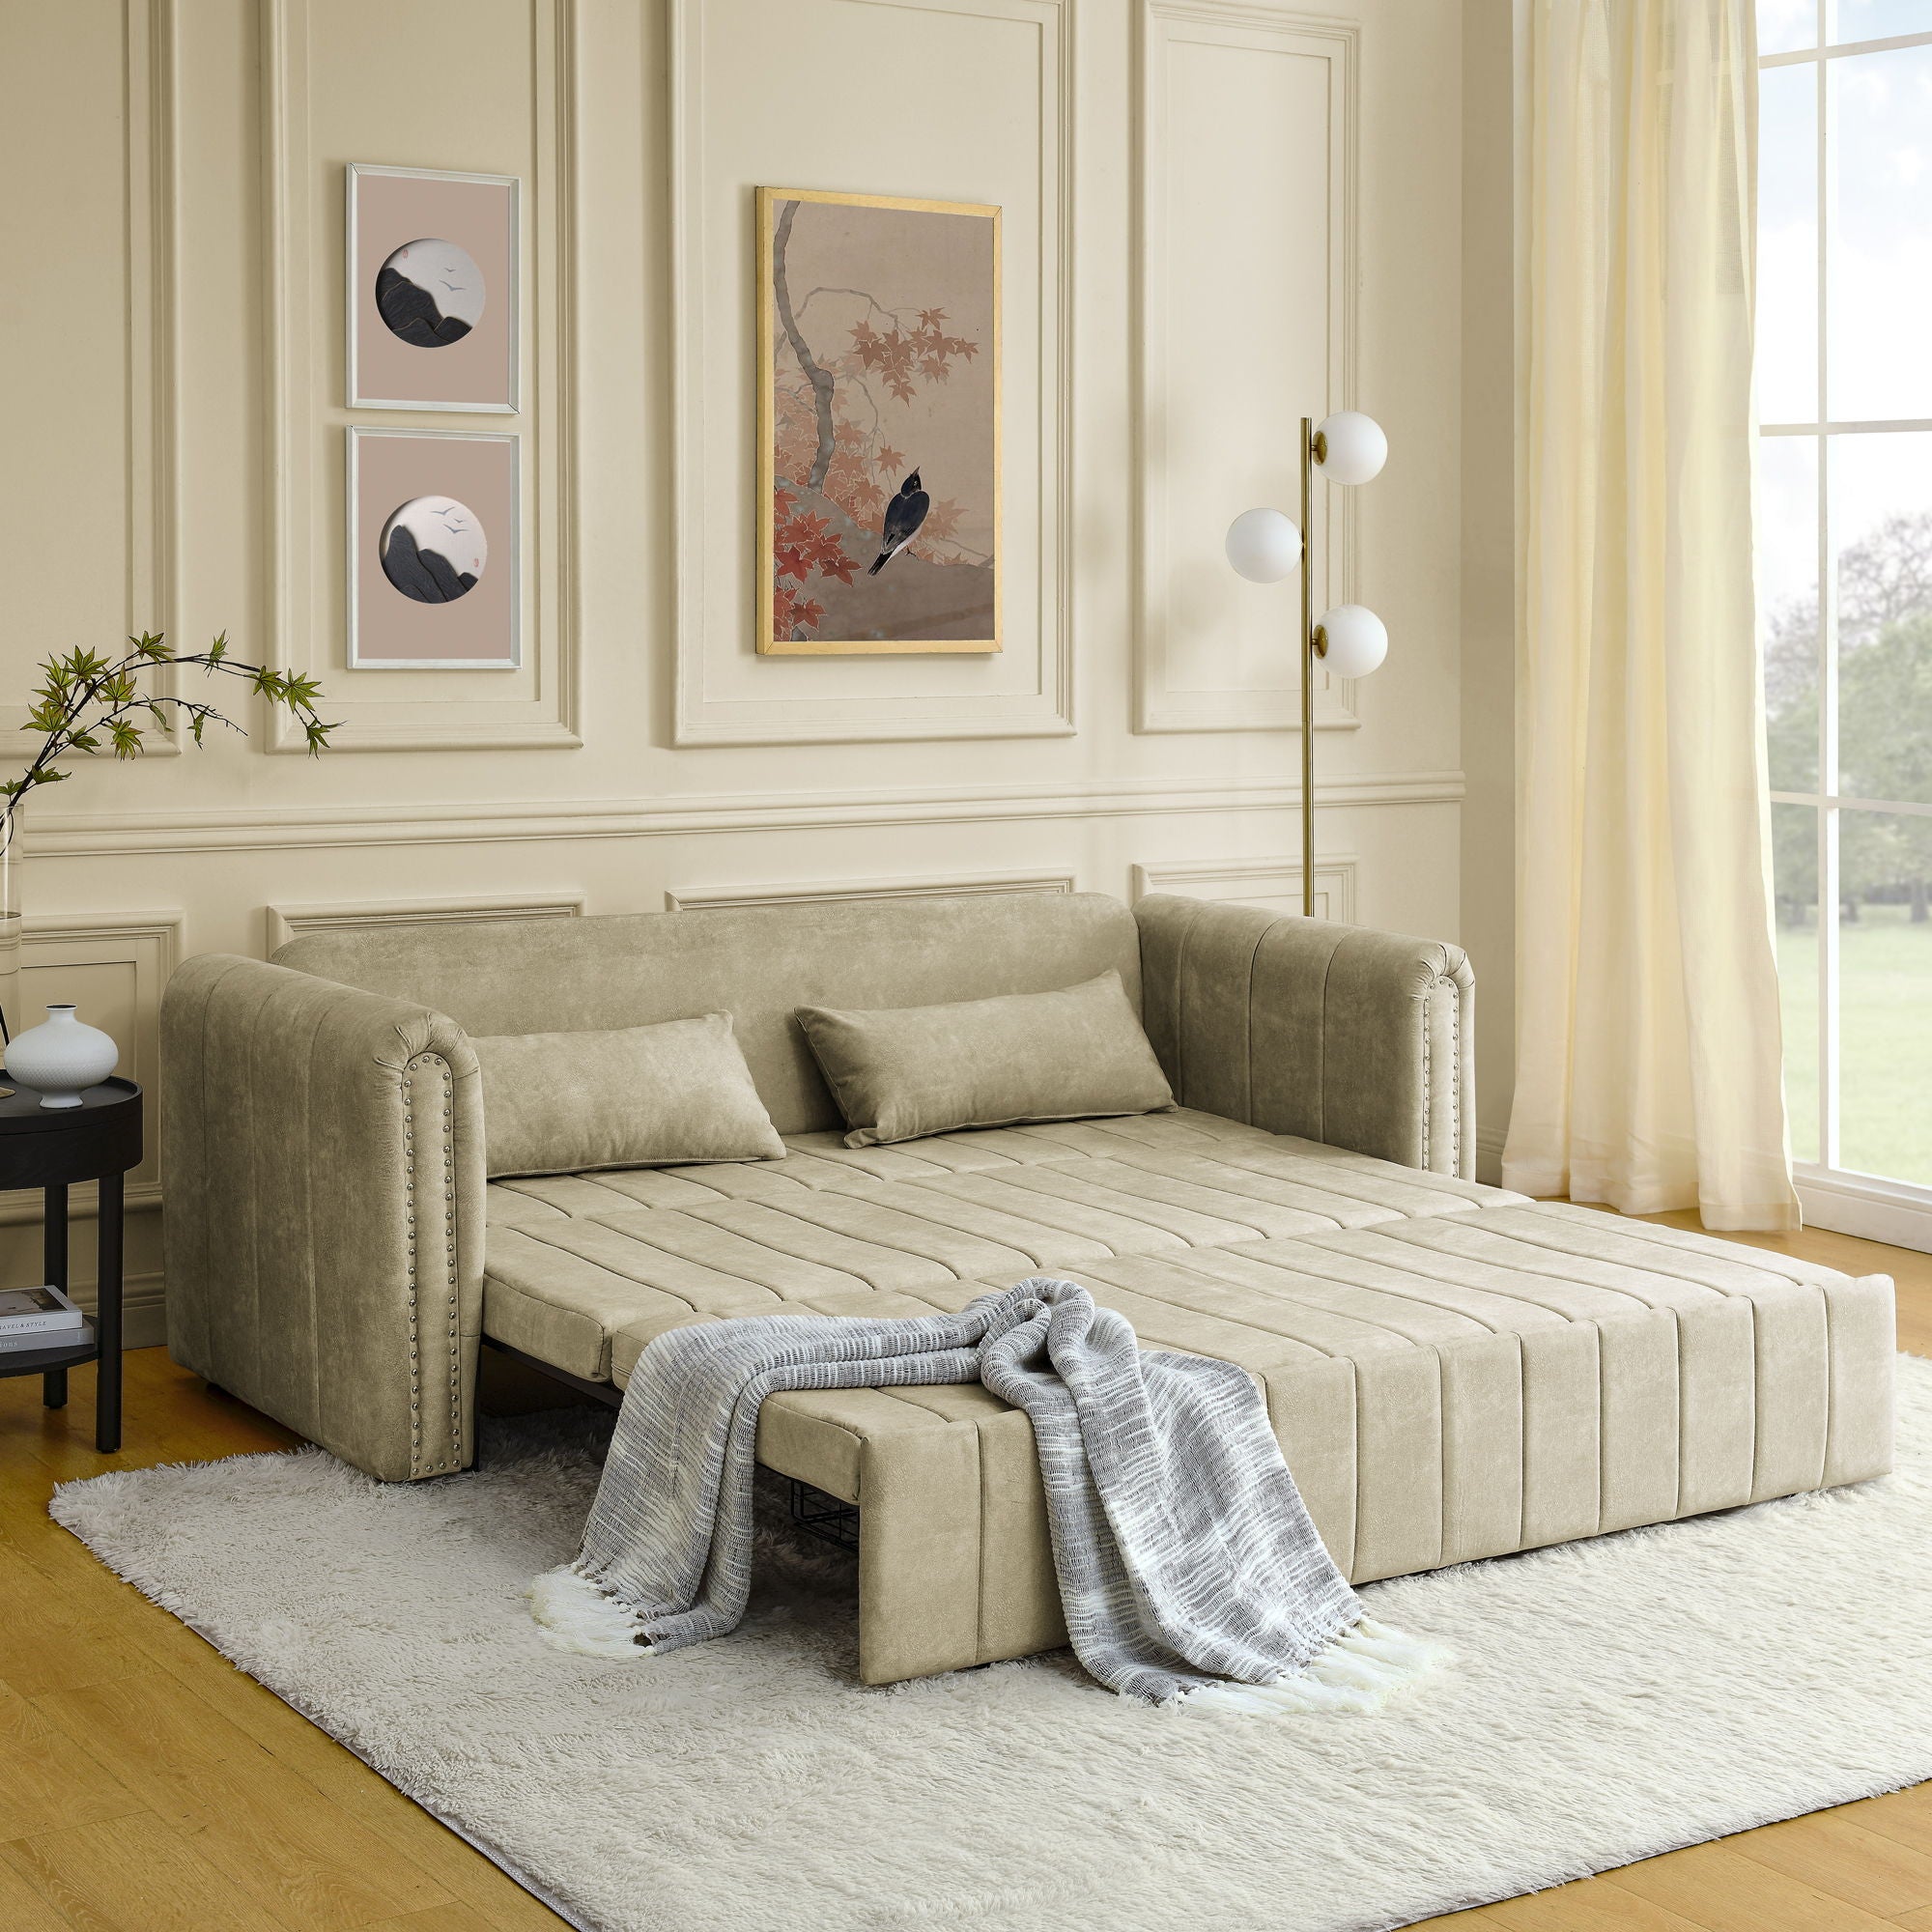 3 In 1 Pull-Out Bed Sleeper, Modern Upholstered 3 Seats Lounge Sofa & Couches With Rolled Arms Decorated With Copper Nails, Convertible Futon 3 Seats Sofabed, Two Drawers And Two Pillows